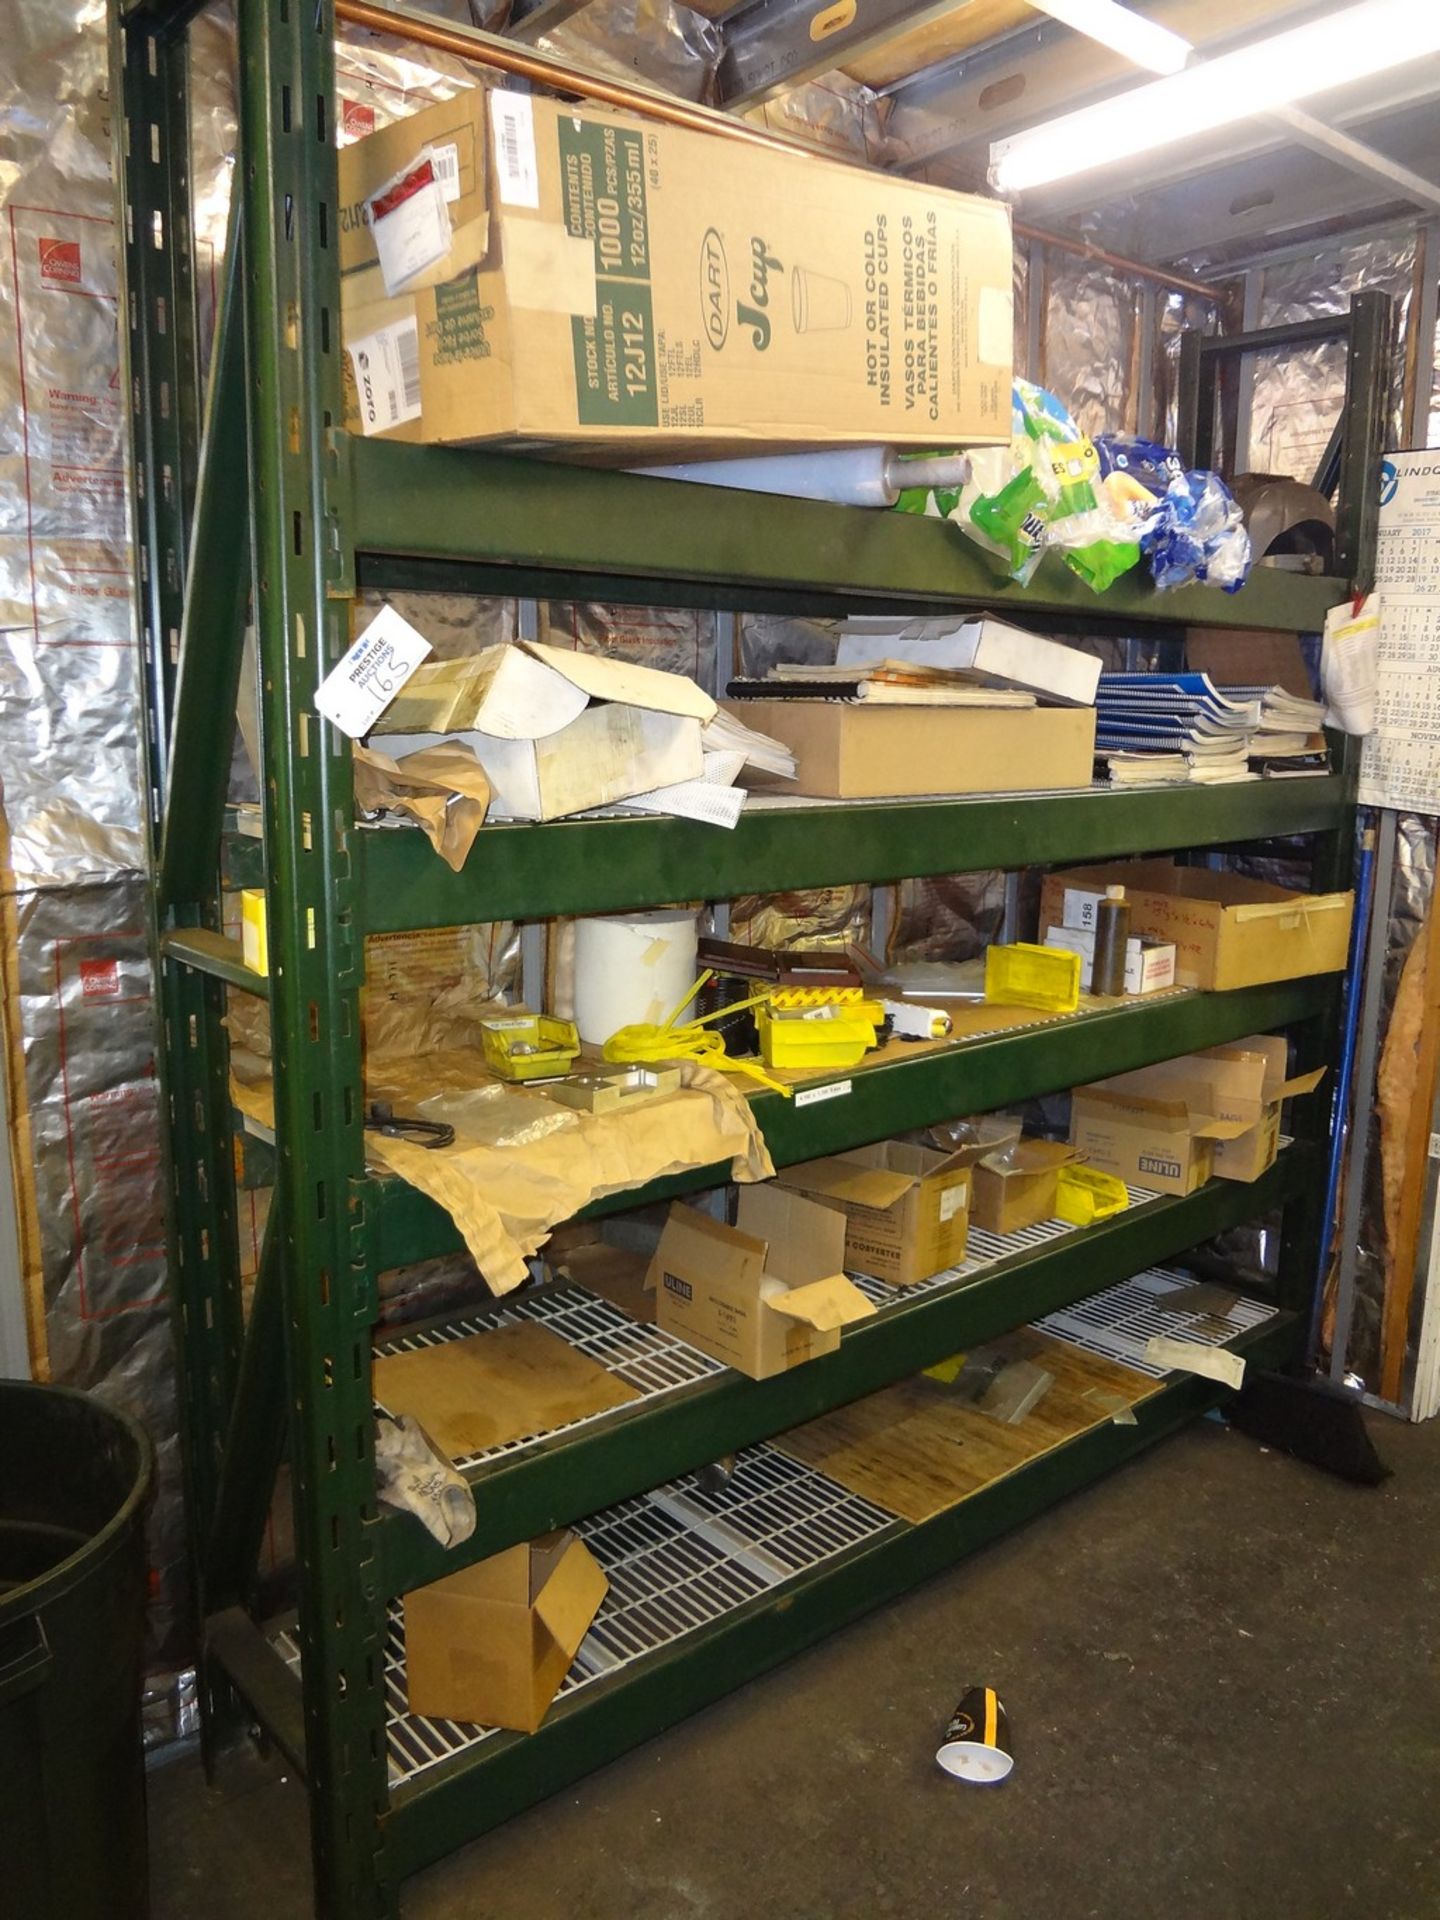 Section of Pallet Rack - No Contents